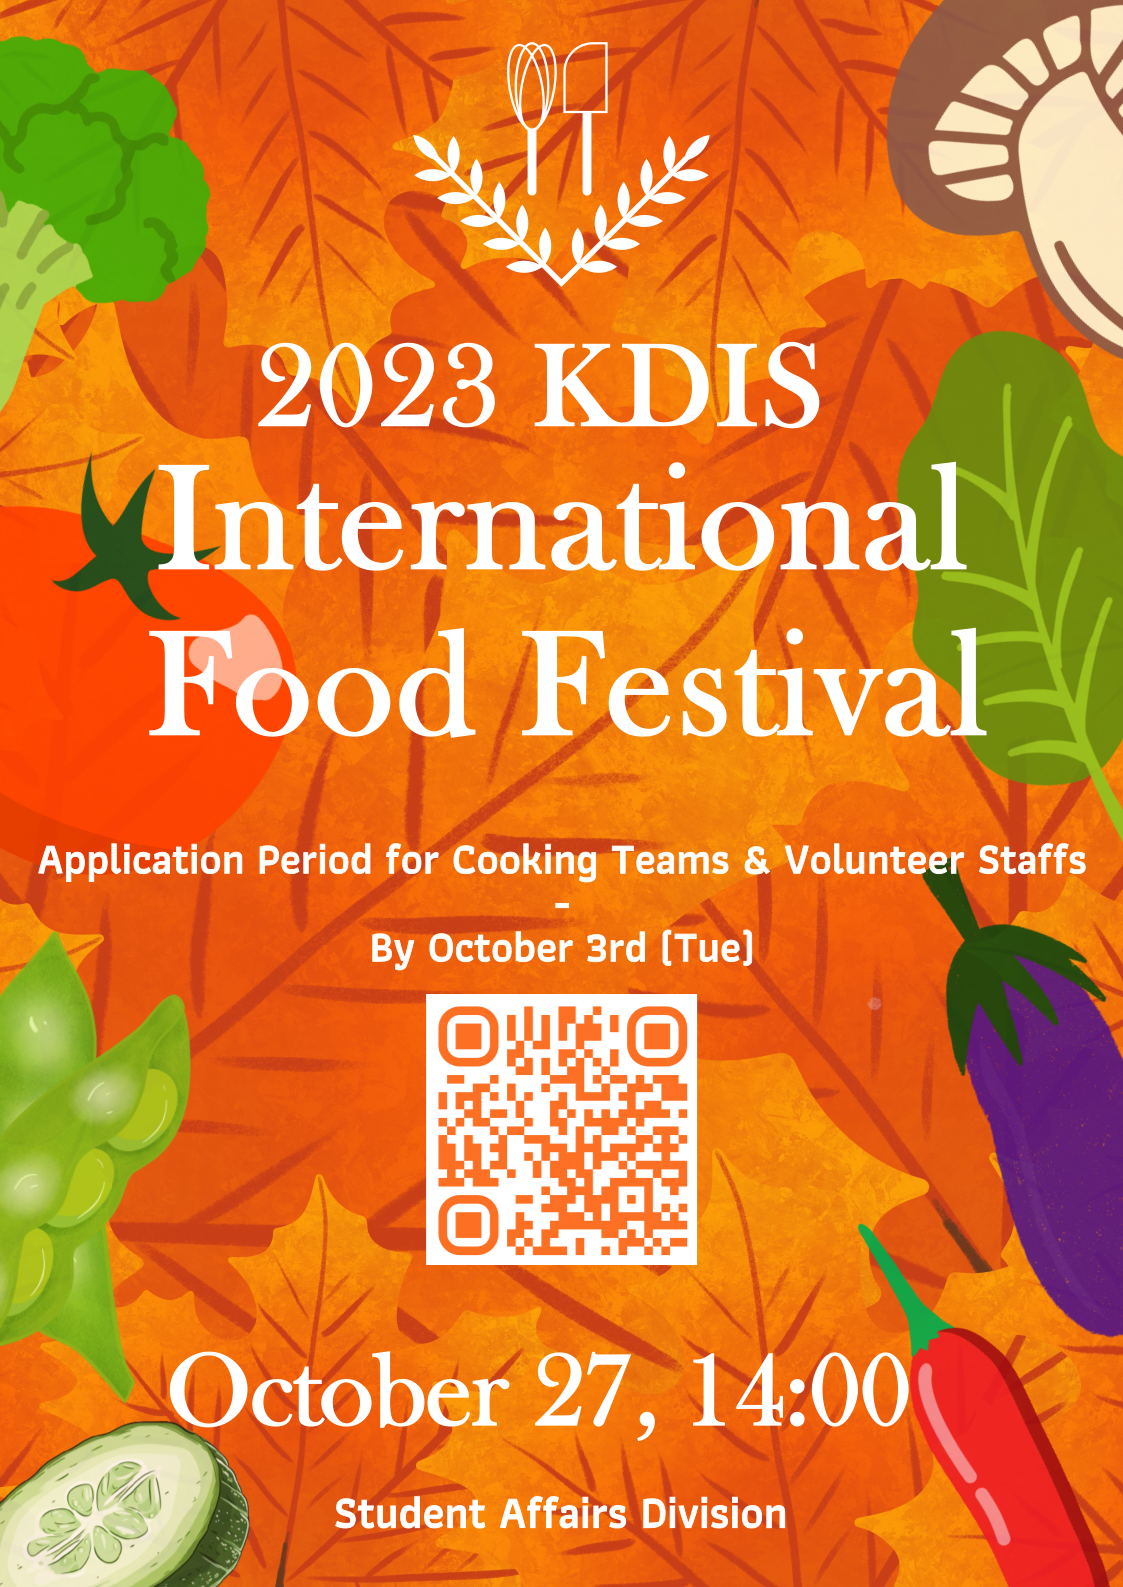  2023 KDIS International Food Festival Application Period for Cooking Teams & Volunteer Staffs By October 3rd (Tue) October 27, 14:00 Student Affairs Division 